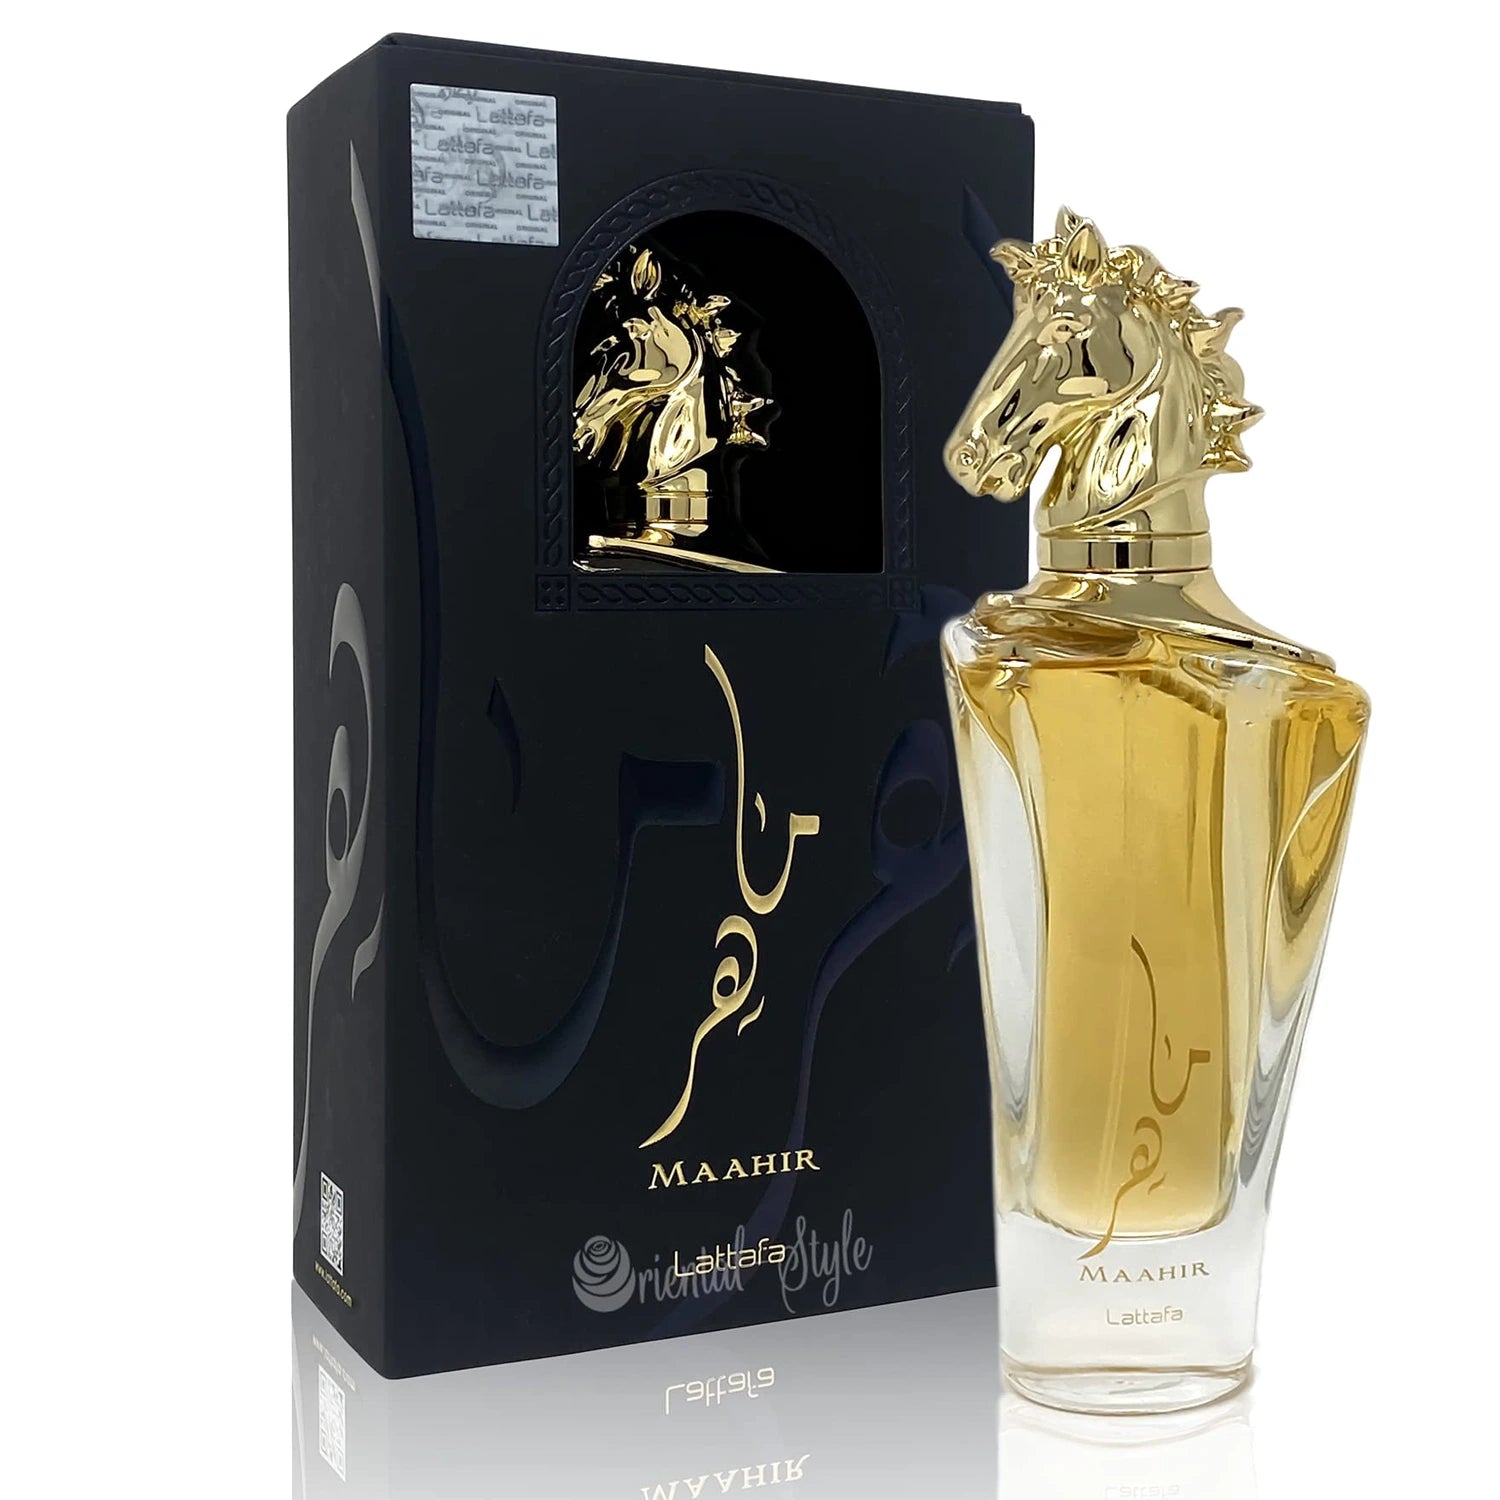 <p><em>﻿INSPIRED BY </em>﻿</p>
<p>From Lattafa Perfumes, Maahir is a unisex 3.4 oz EDP with an unforgettable charm. Its top notes of peach bergamot and red berries make way to a heart of red lily, peony and jasmine, and further mellowed by a base of vanilla flower, musk, and sandalwood. A tantalizing fresh scent for everyday.</p>